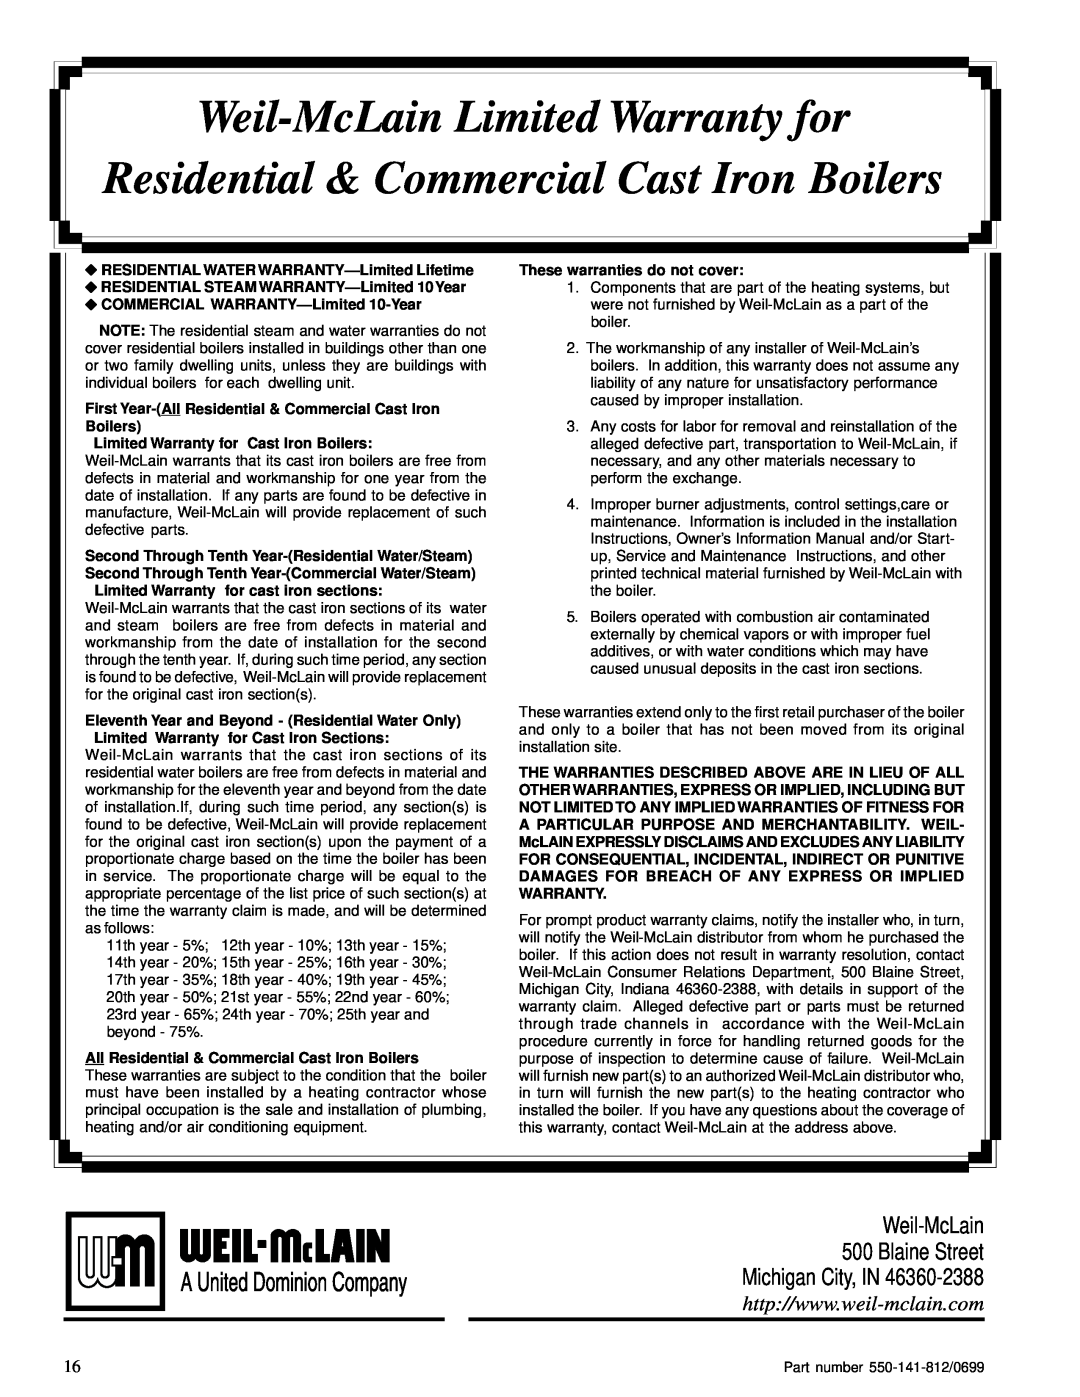 Weil-McLain 3 Series manual Weil-McLainLimited Warranty for, Residential & Commercial Cast Iron Boilers 